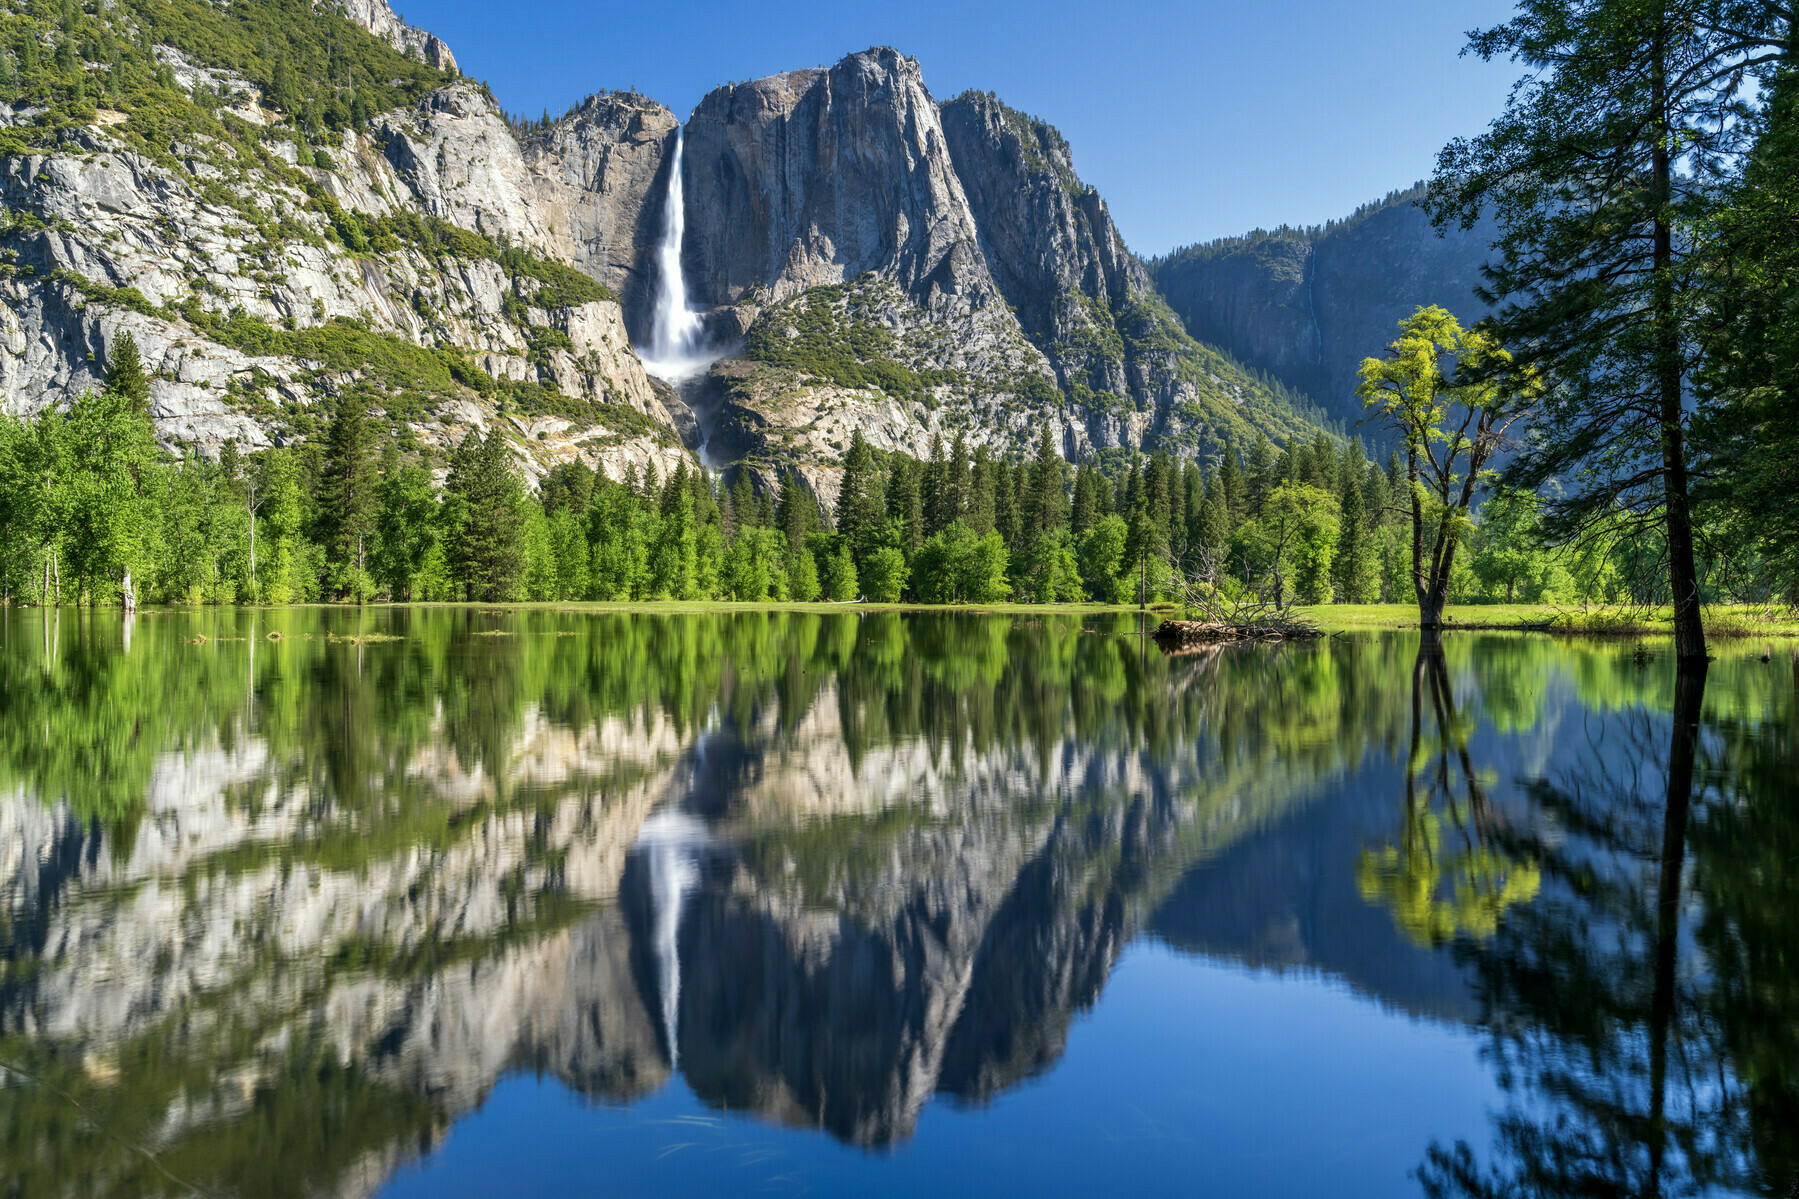 Morning light and a reflection of Yosemite Falls pouring into the valley, flooded by spring snowmelt. The Merced River's calm surface belies incredible flows as it covers the meadows.